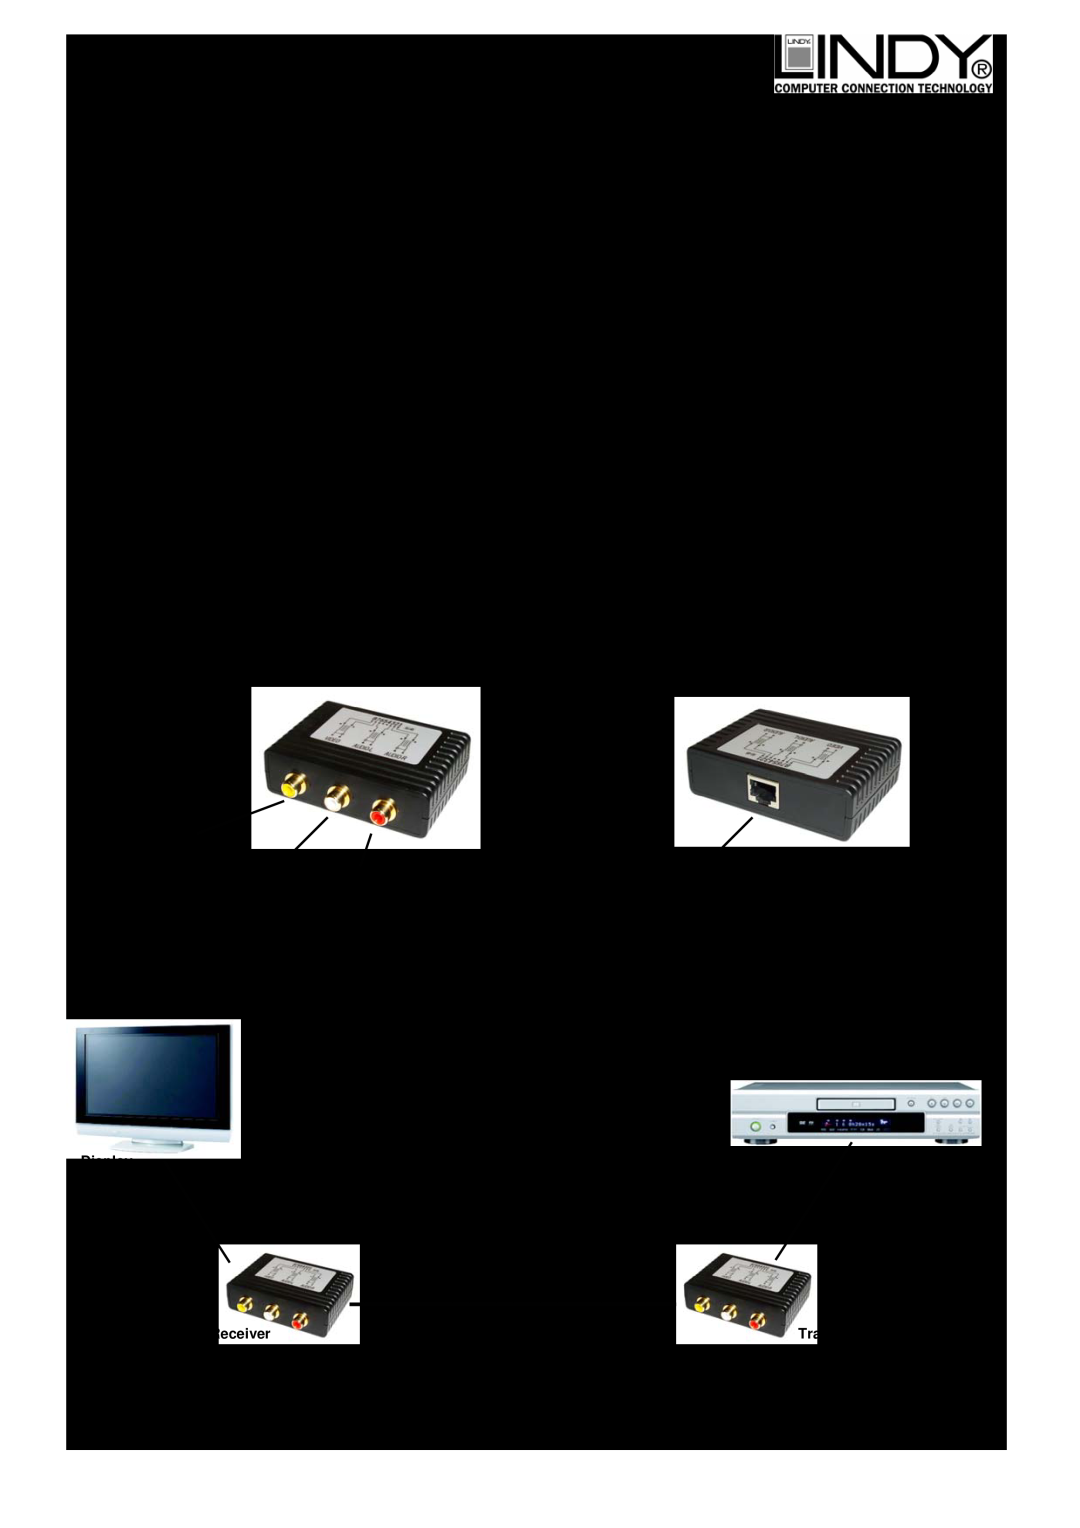 Lindy CAT5E/6 specifications Audio/Video Extender CAT5e/6, Introduction, Specifications, Connectors, Connection Diagram 